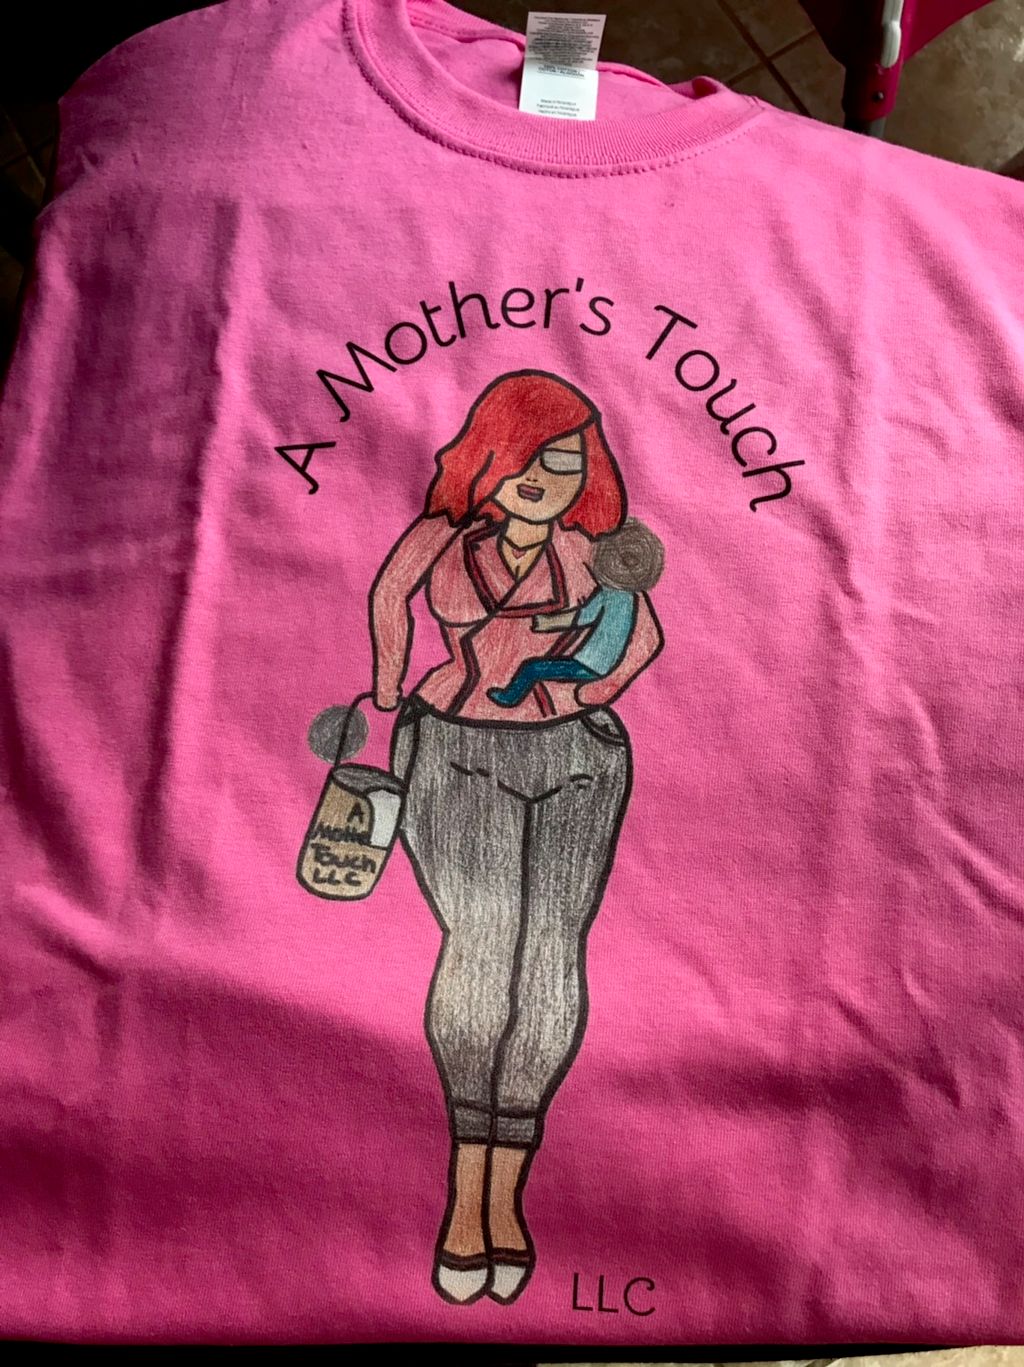 A MOTHER’S TOUCH LLC